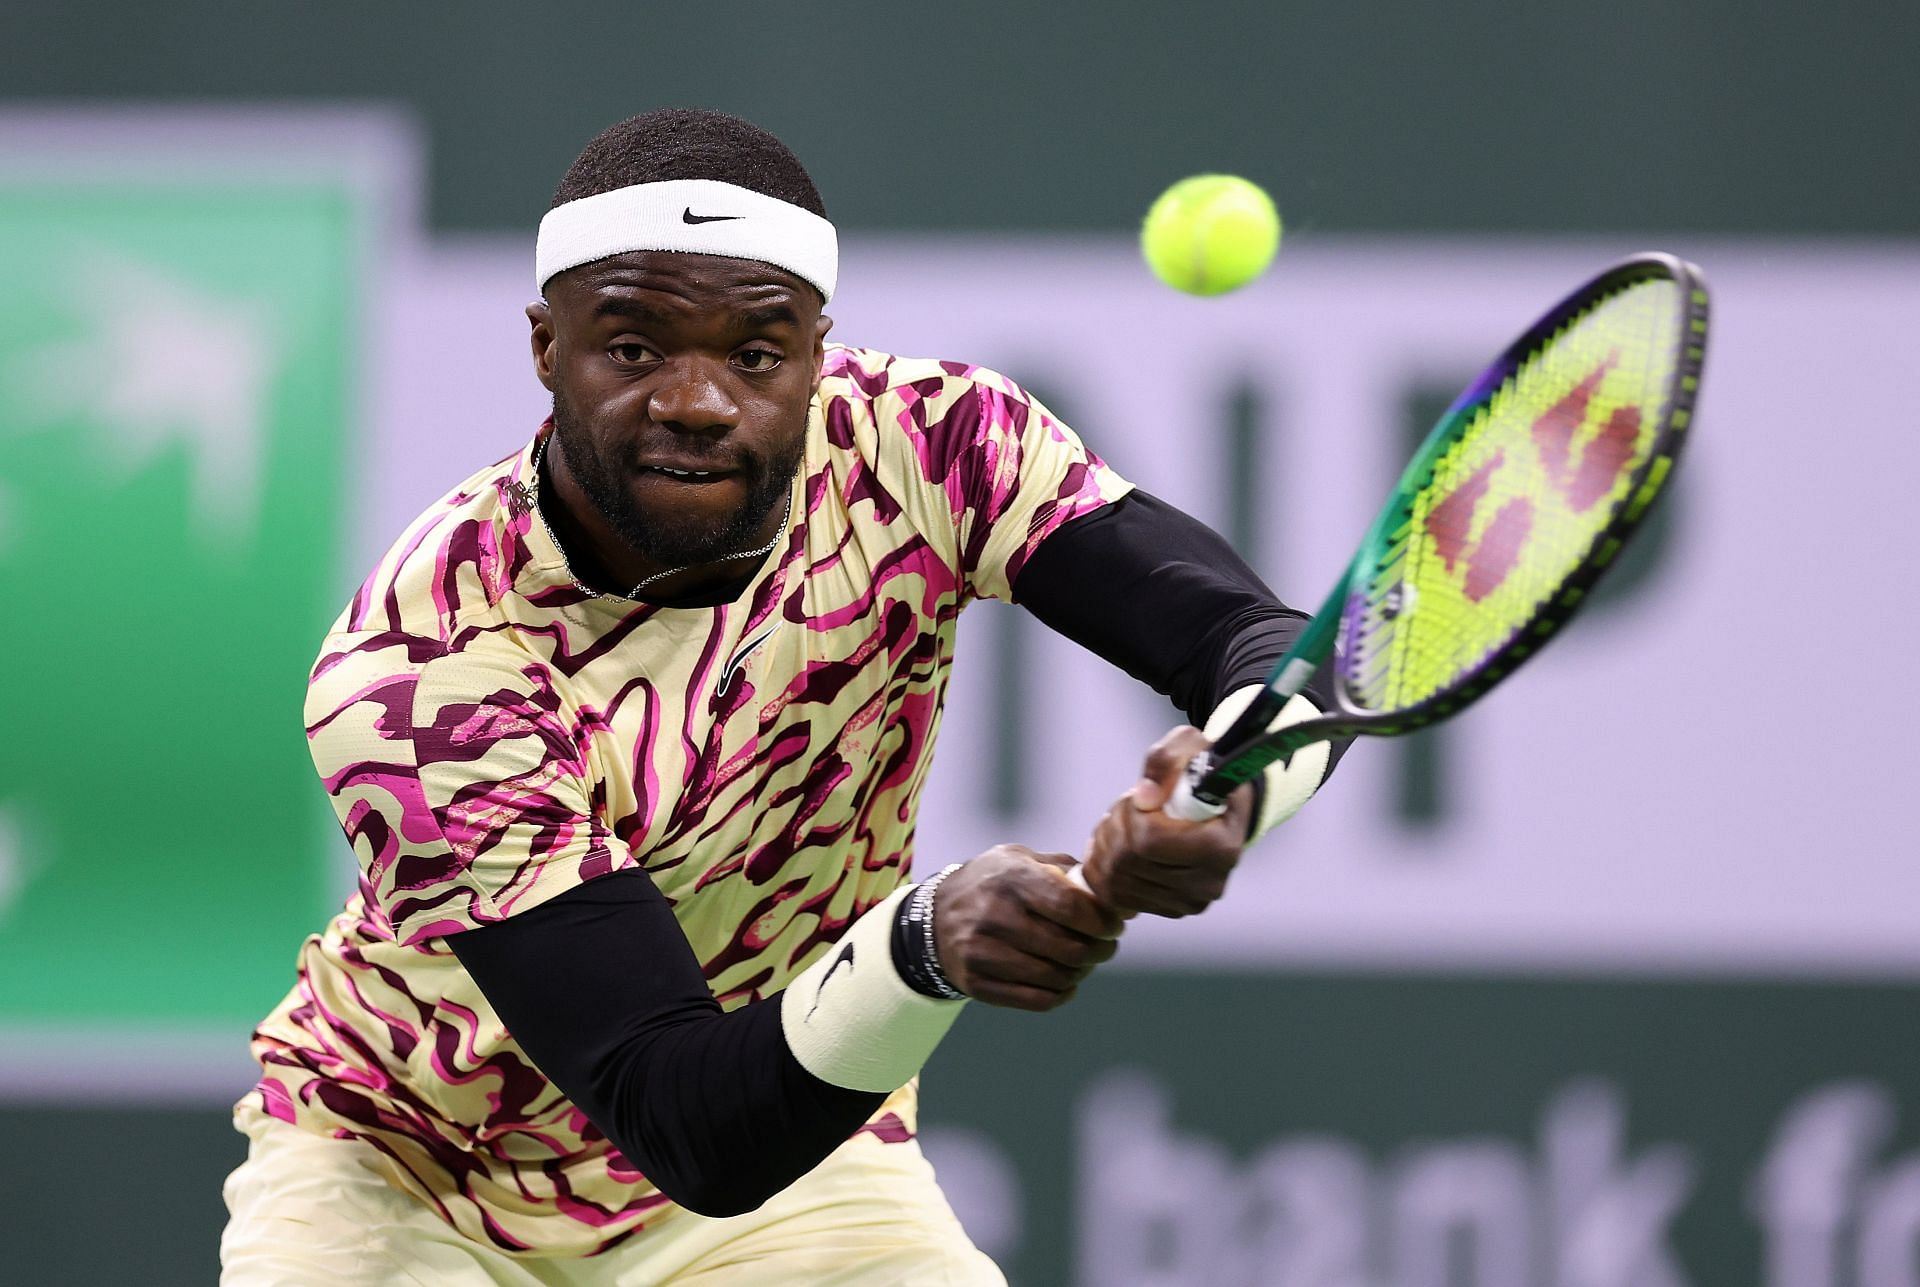 Tiafoe is into the third round for the third straight year.